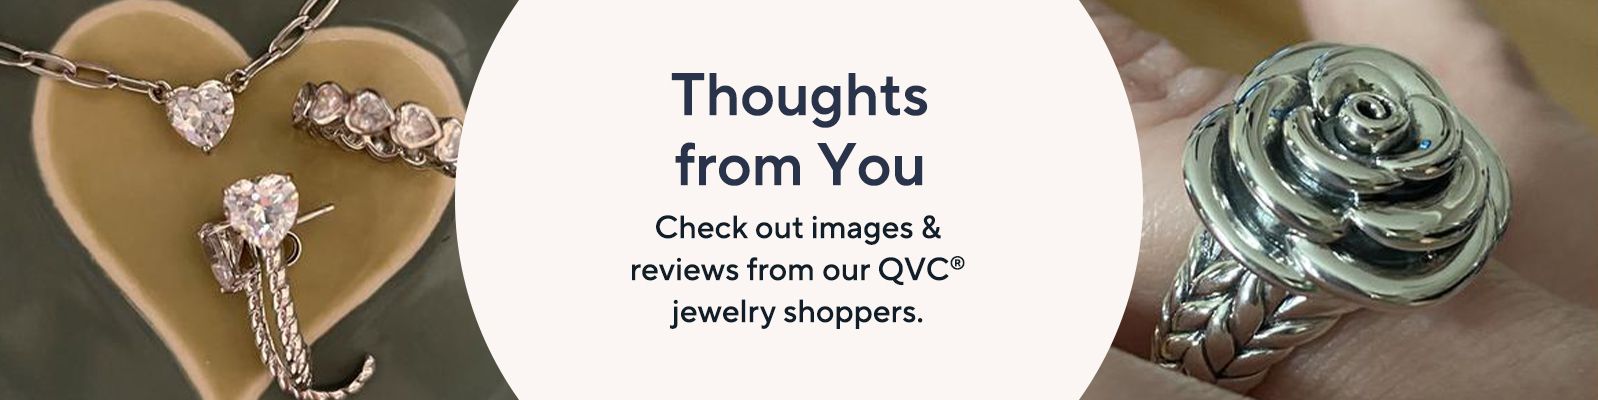 Thoughts from You  Check out images & reviews from our QVC® jewelry shoppers.